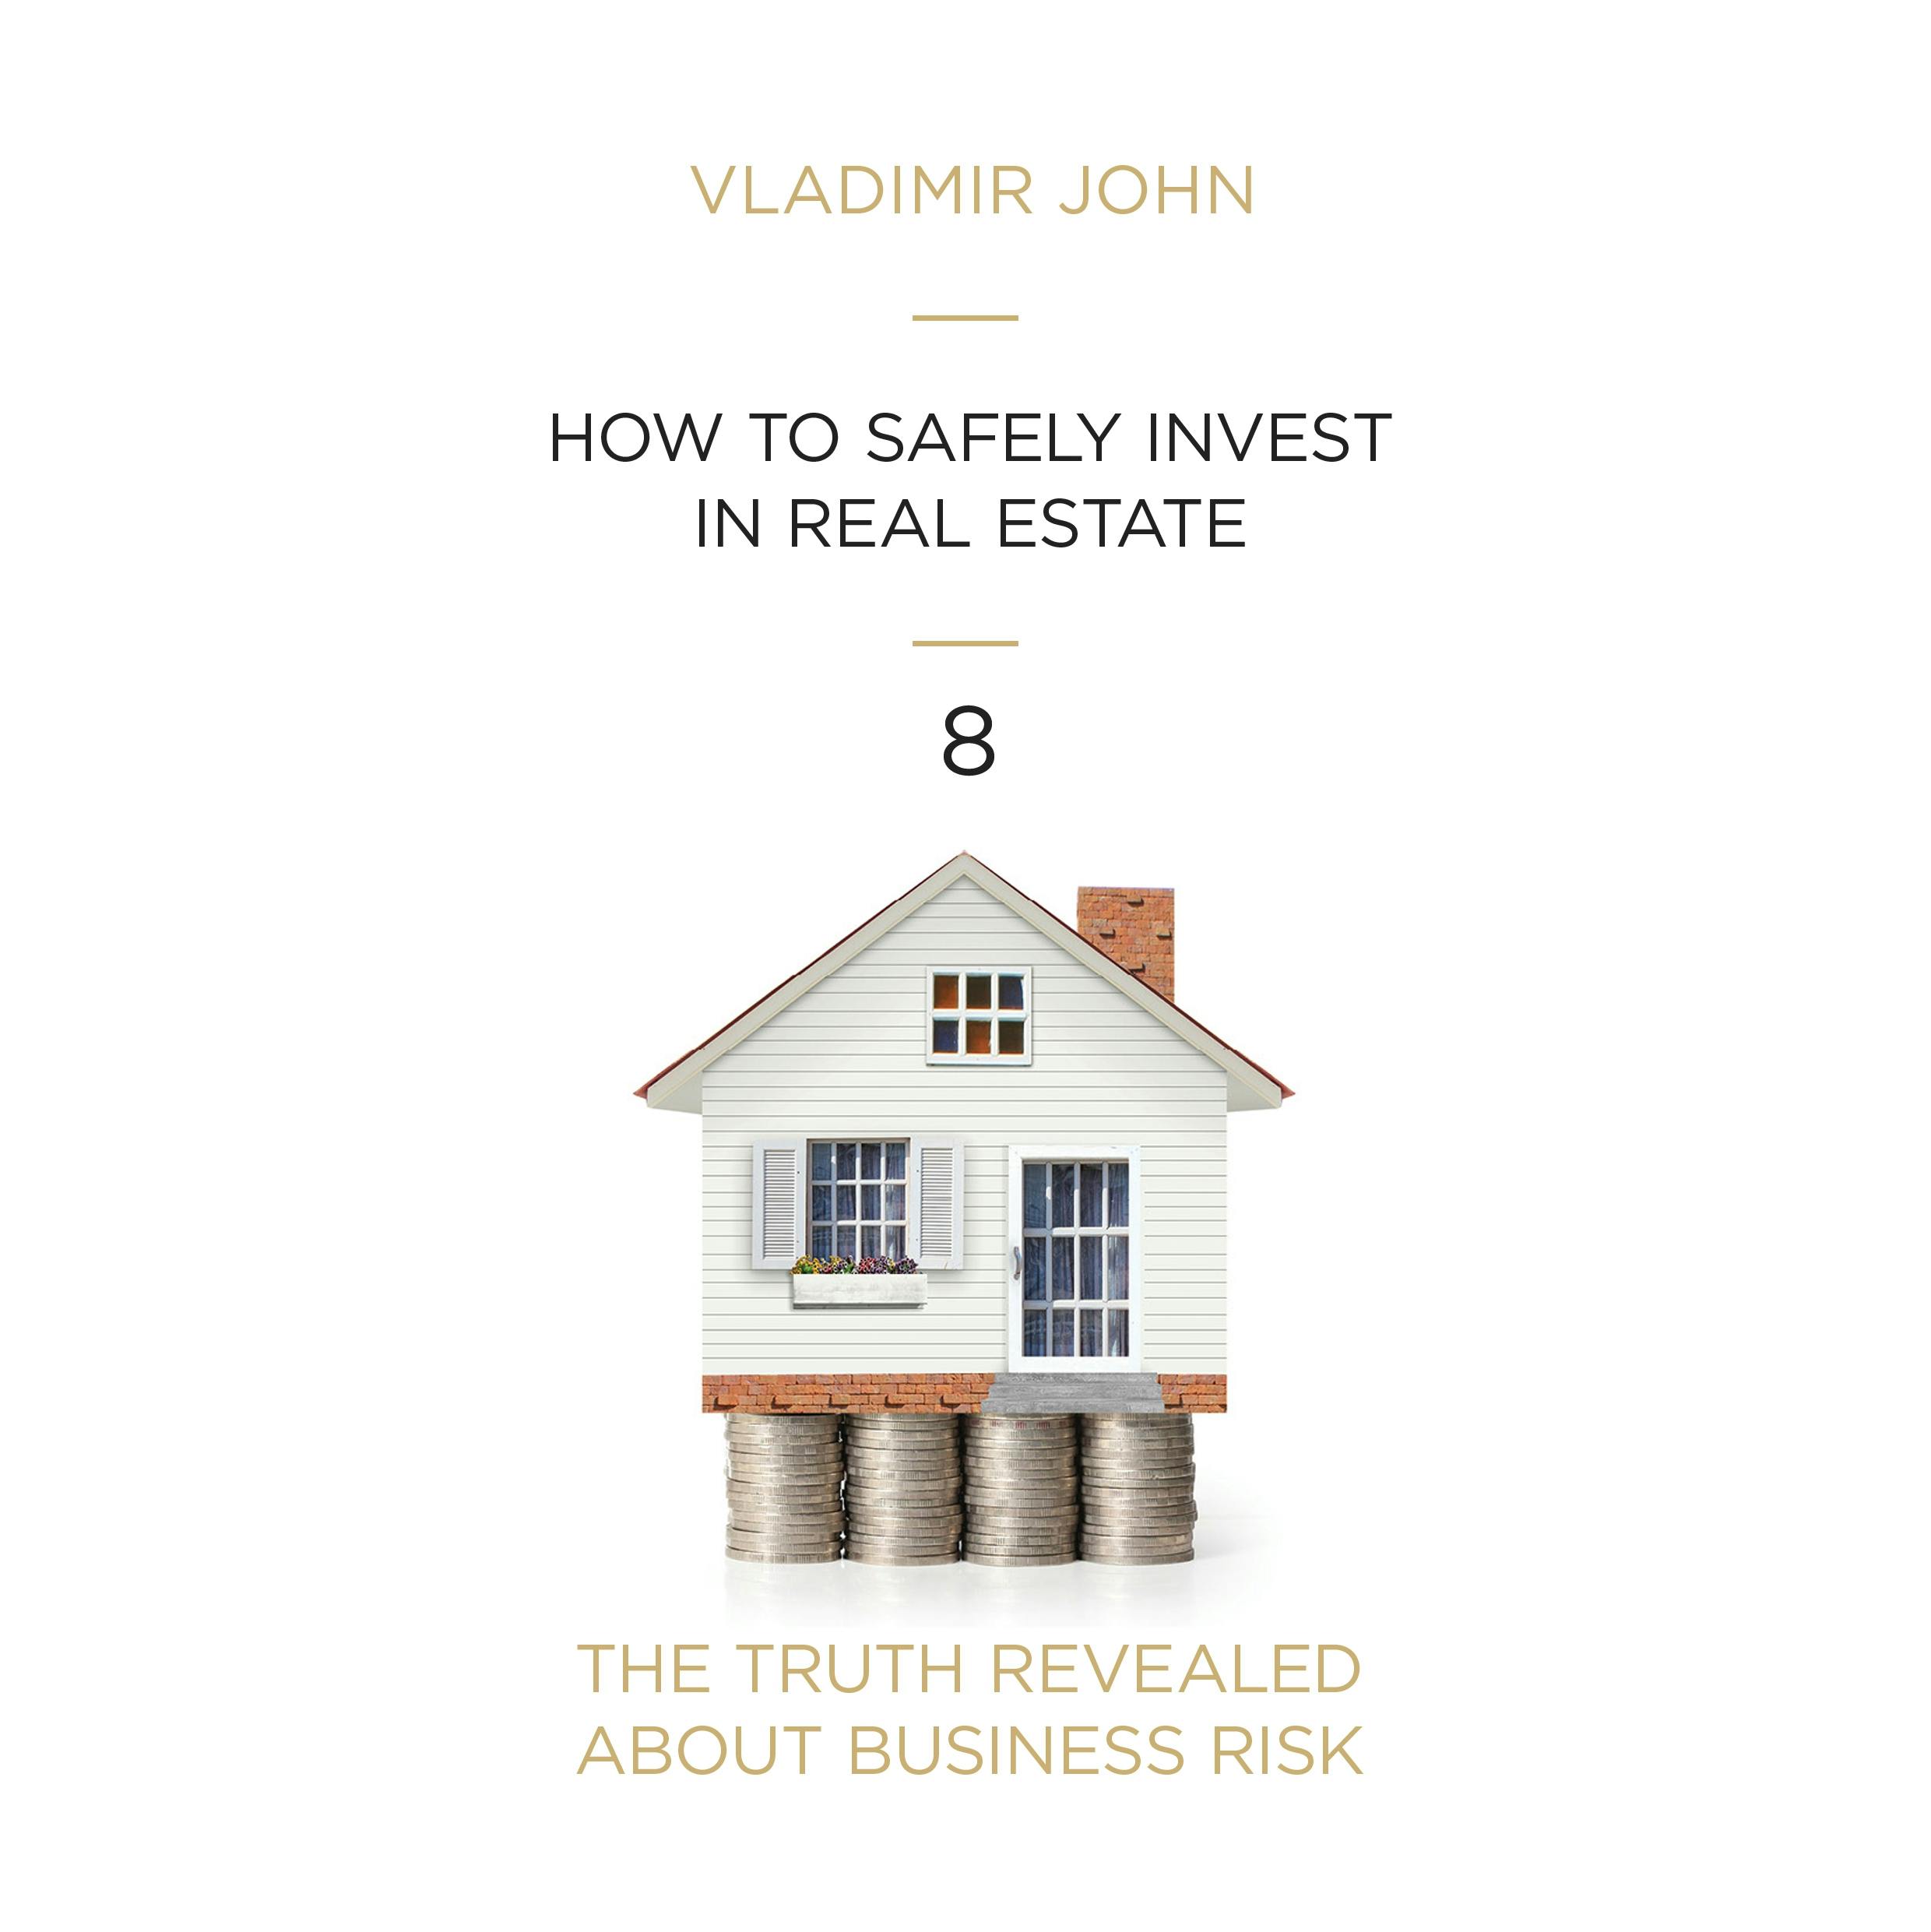 How to Safely Invest in Real Estate - Vladimir John